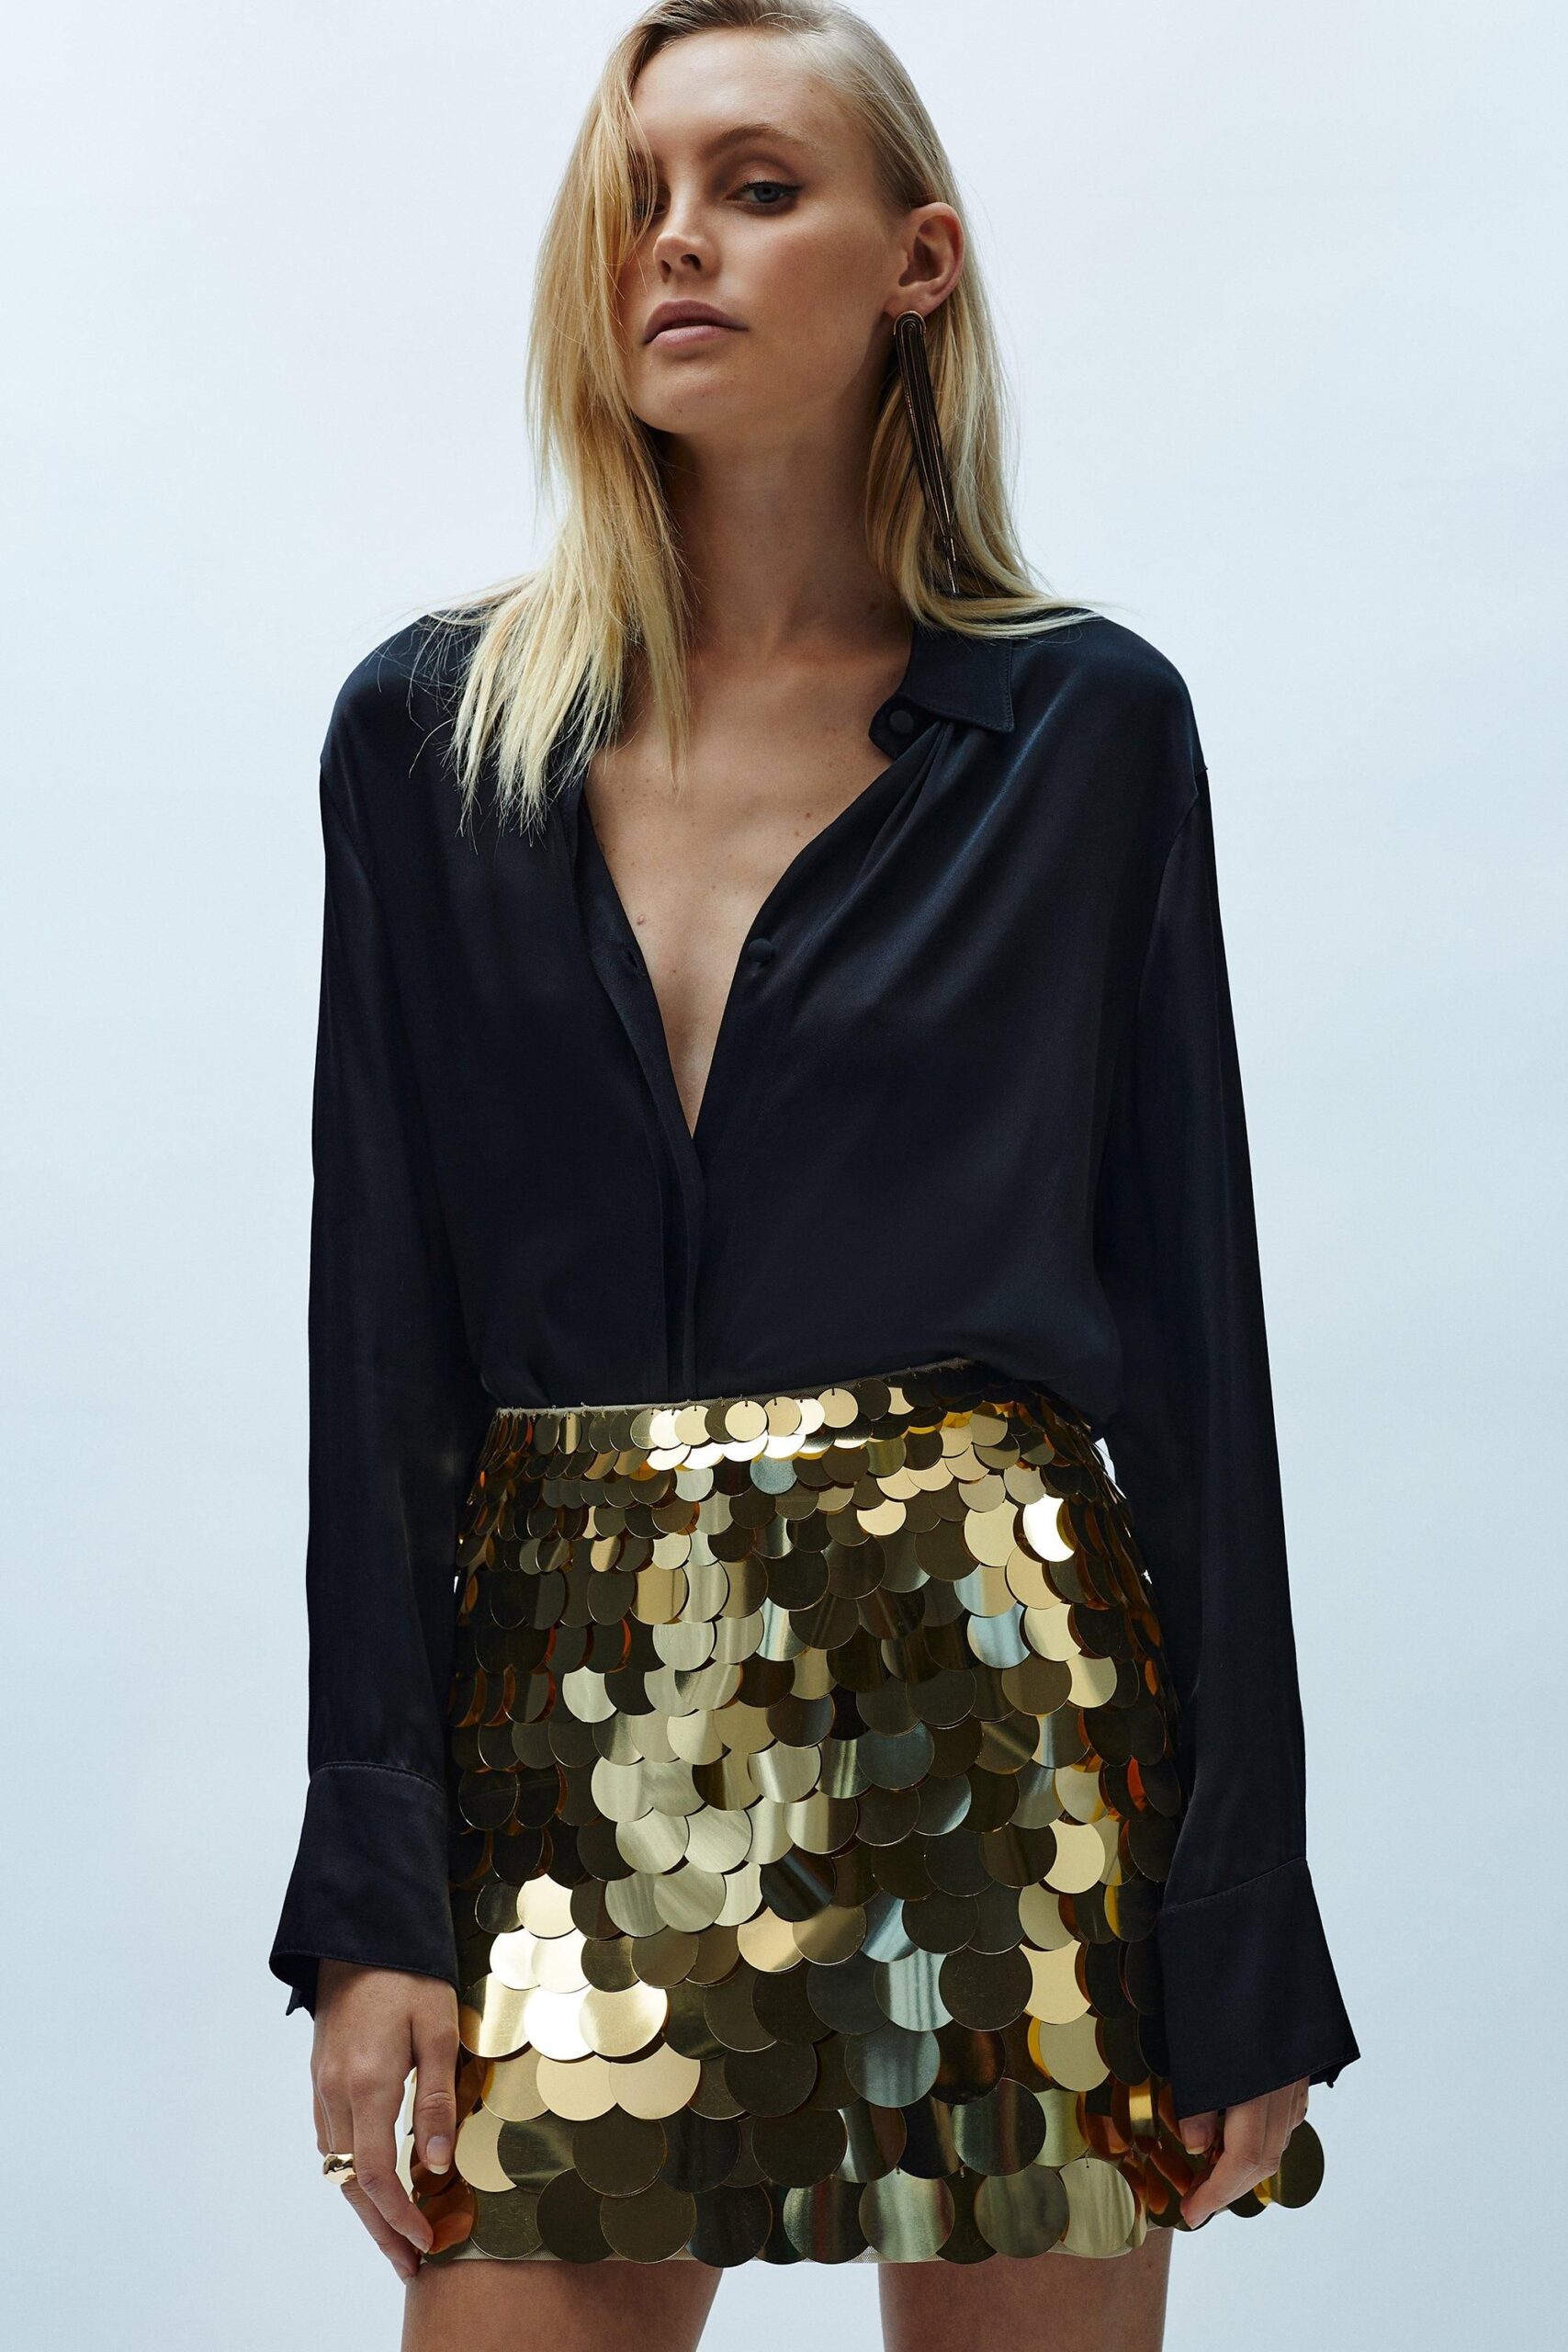 How to Style a Gold Sequin Skirt for the
Holidays